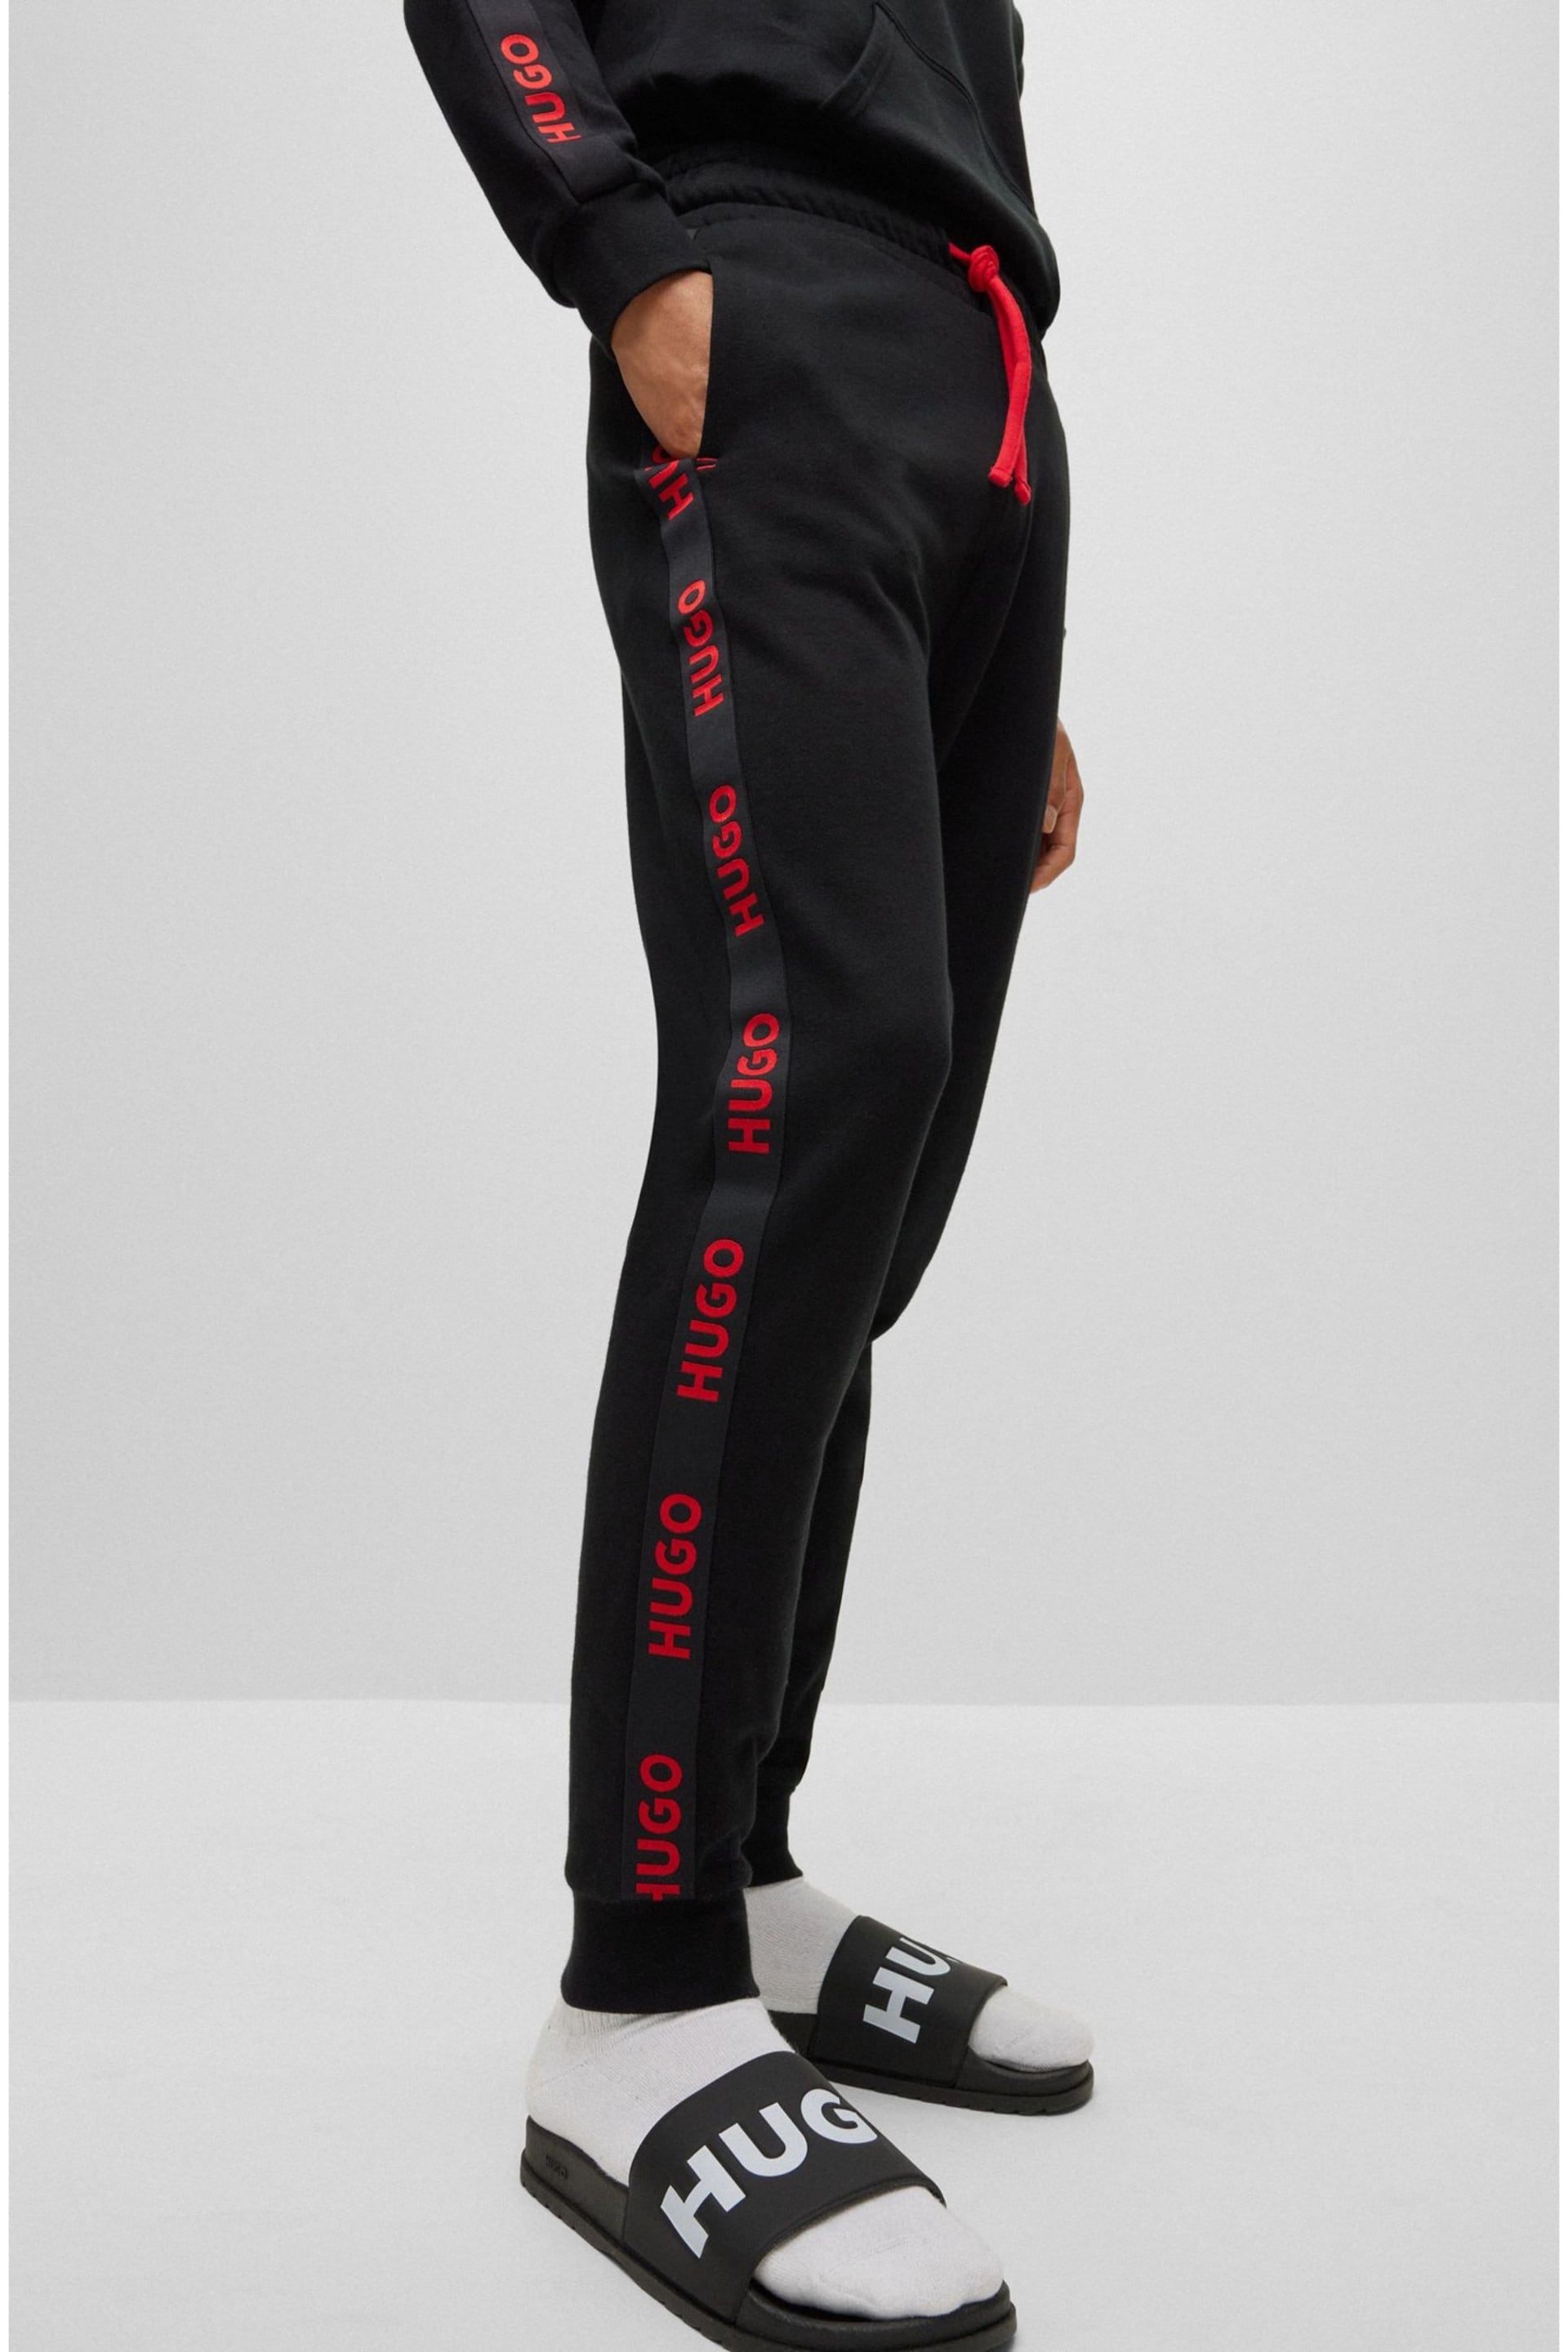 HUGO Embroidered Tape Logo Tracksuit Joggers - Image 5 of 6